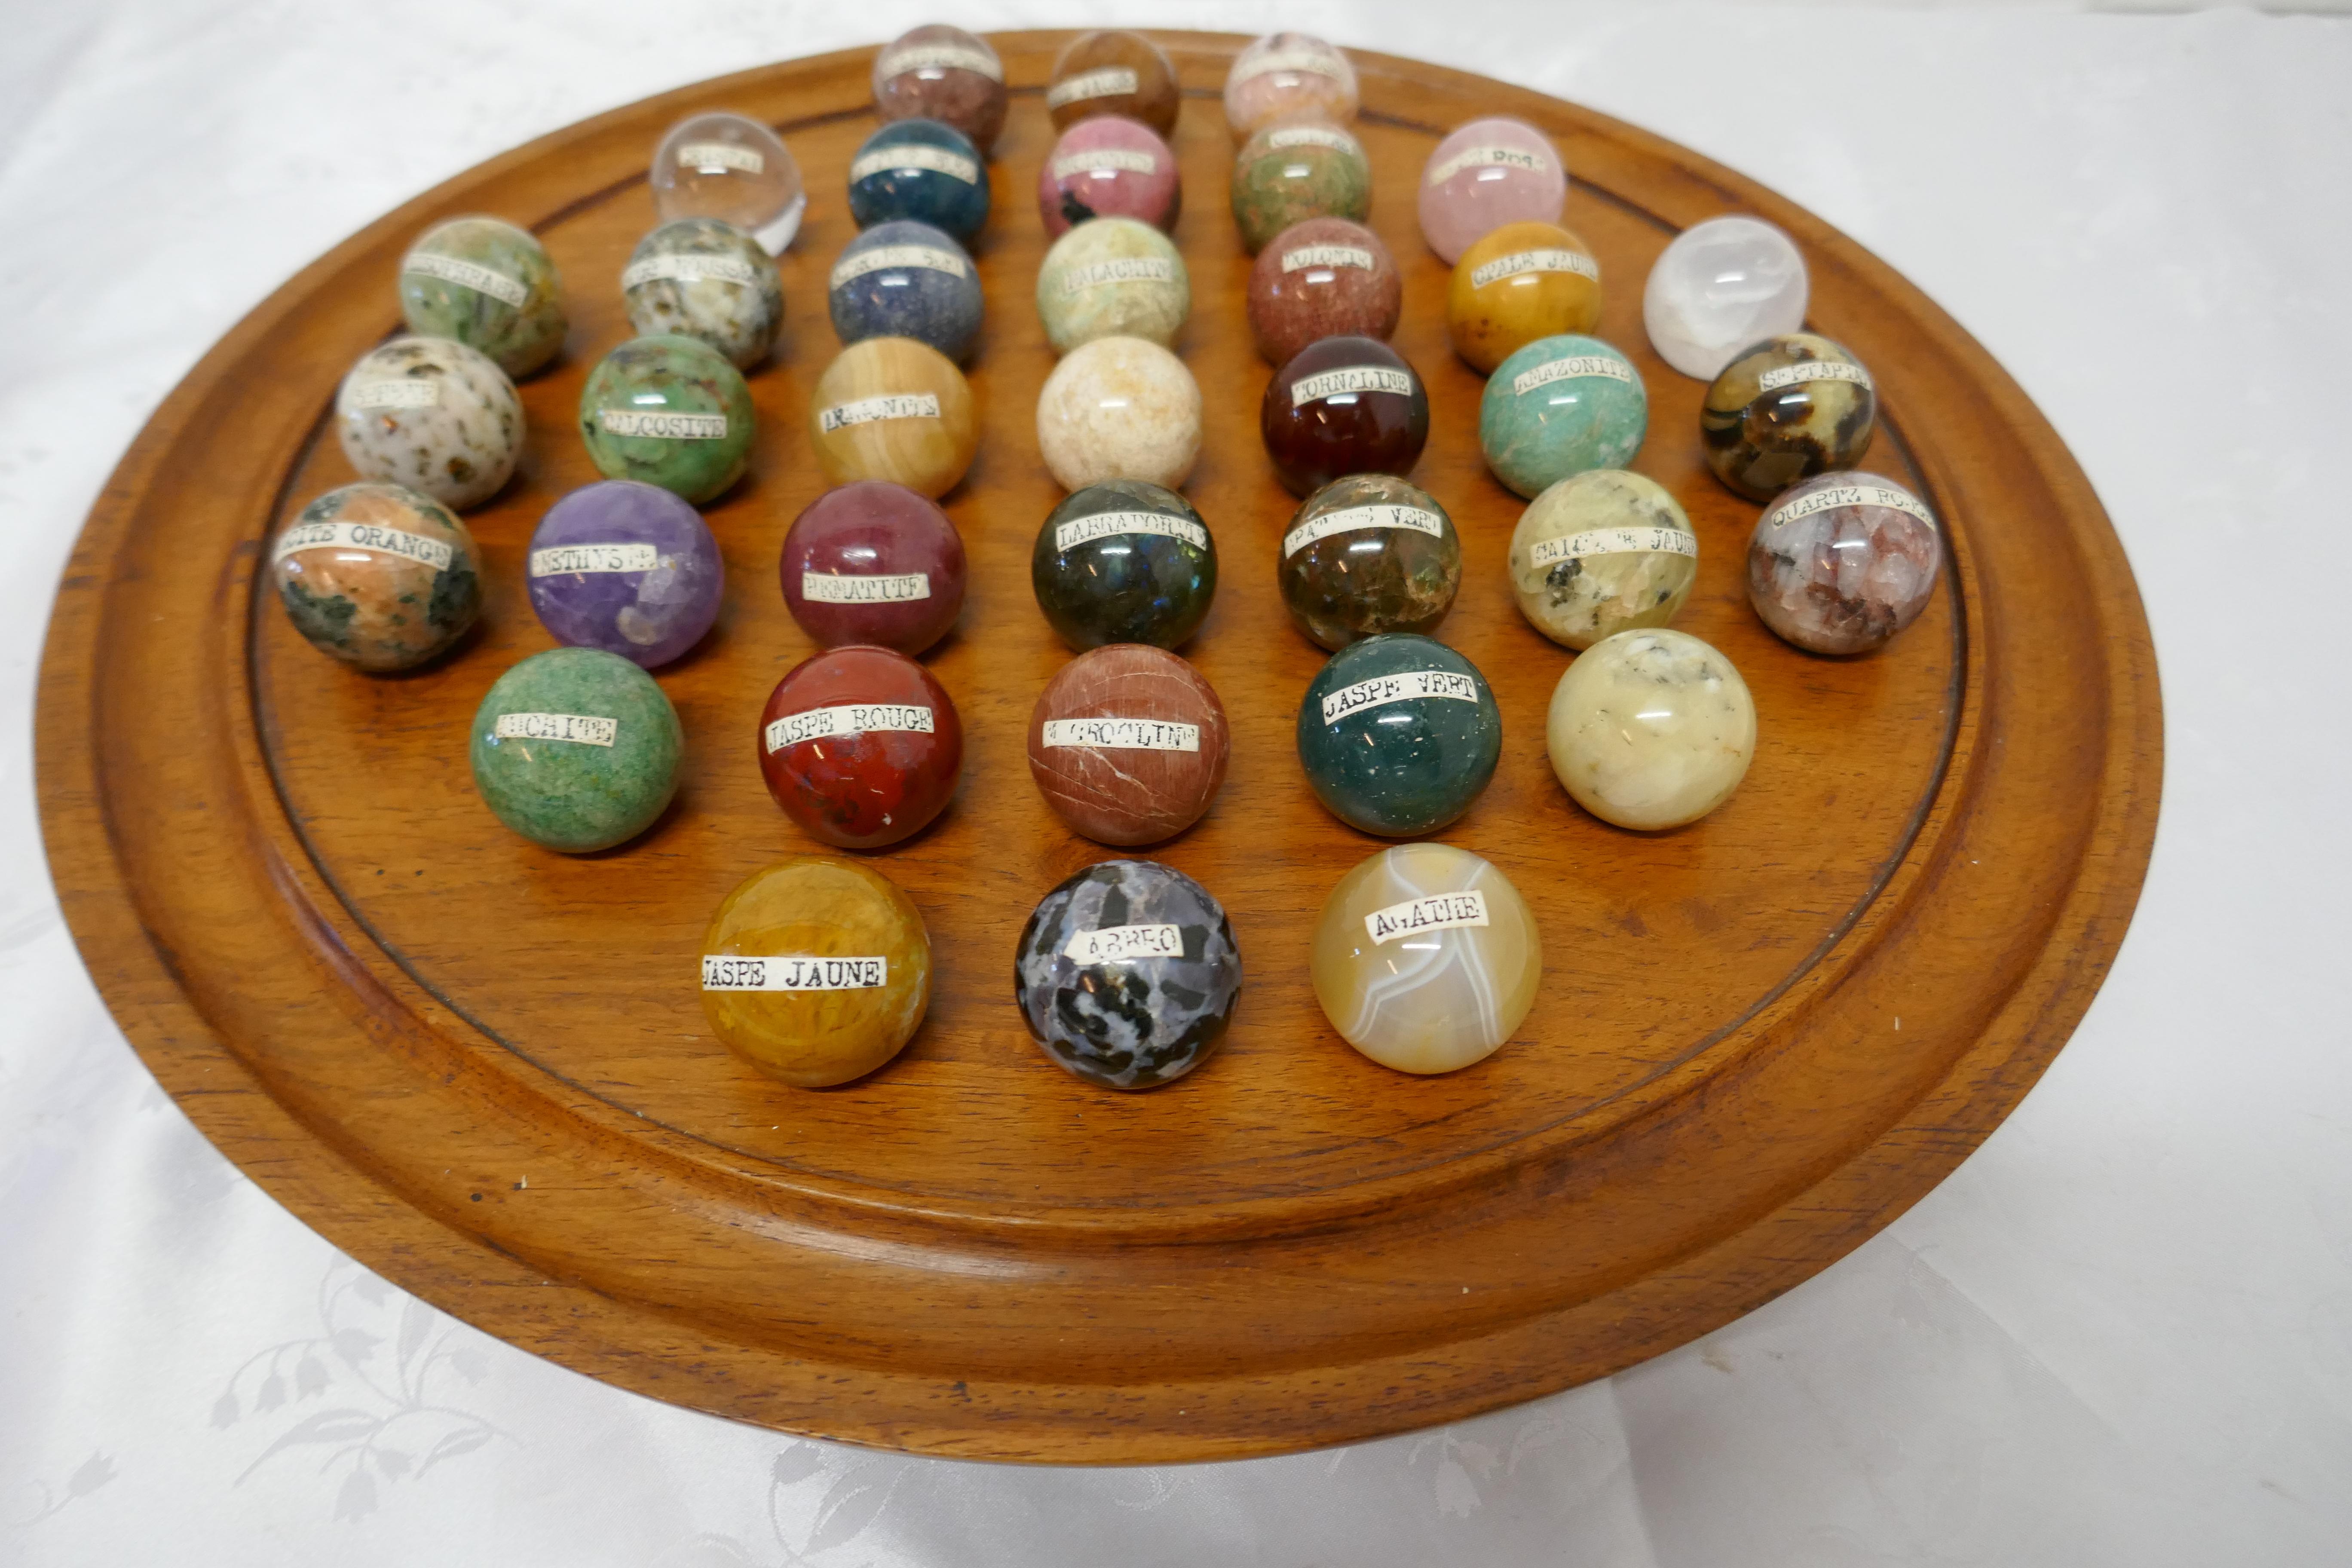 A set of French marble orbs on a turned solitaire board

This is a great collection, there are 37, 3cm marbles, made in mostly marble but some other minerals, all but 3 are labeled with their French names, they are set on a turned a walnut